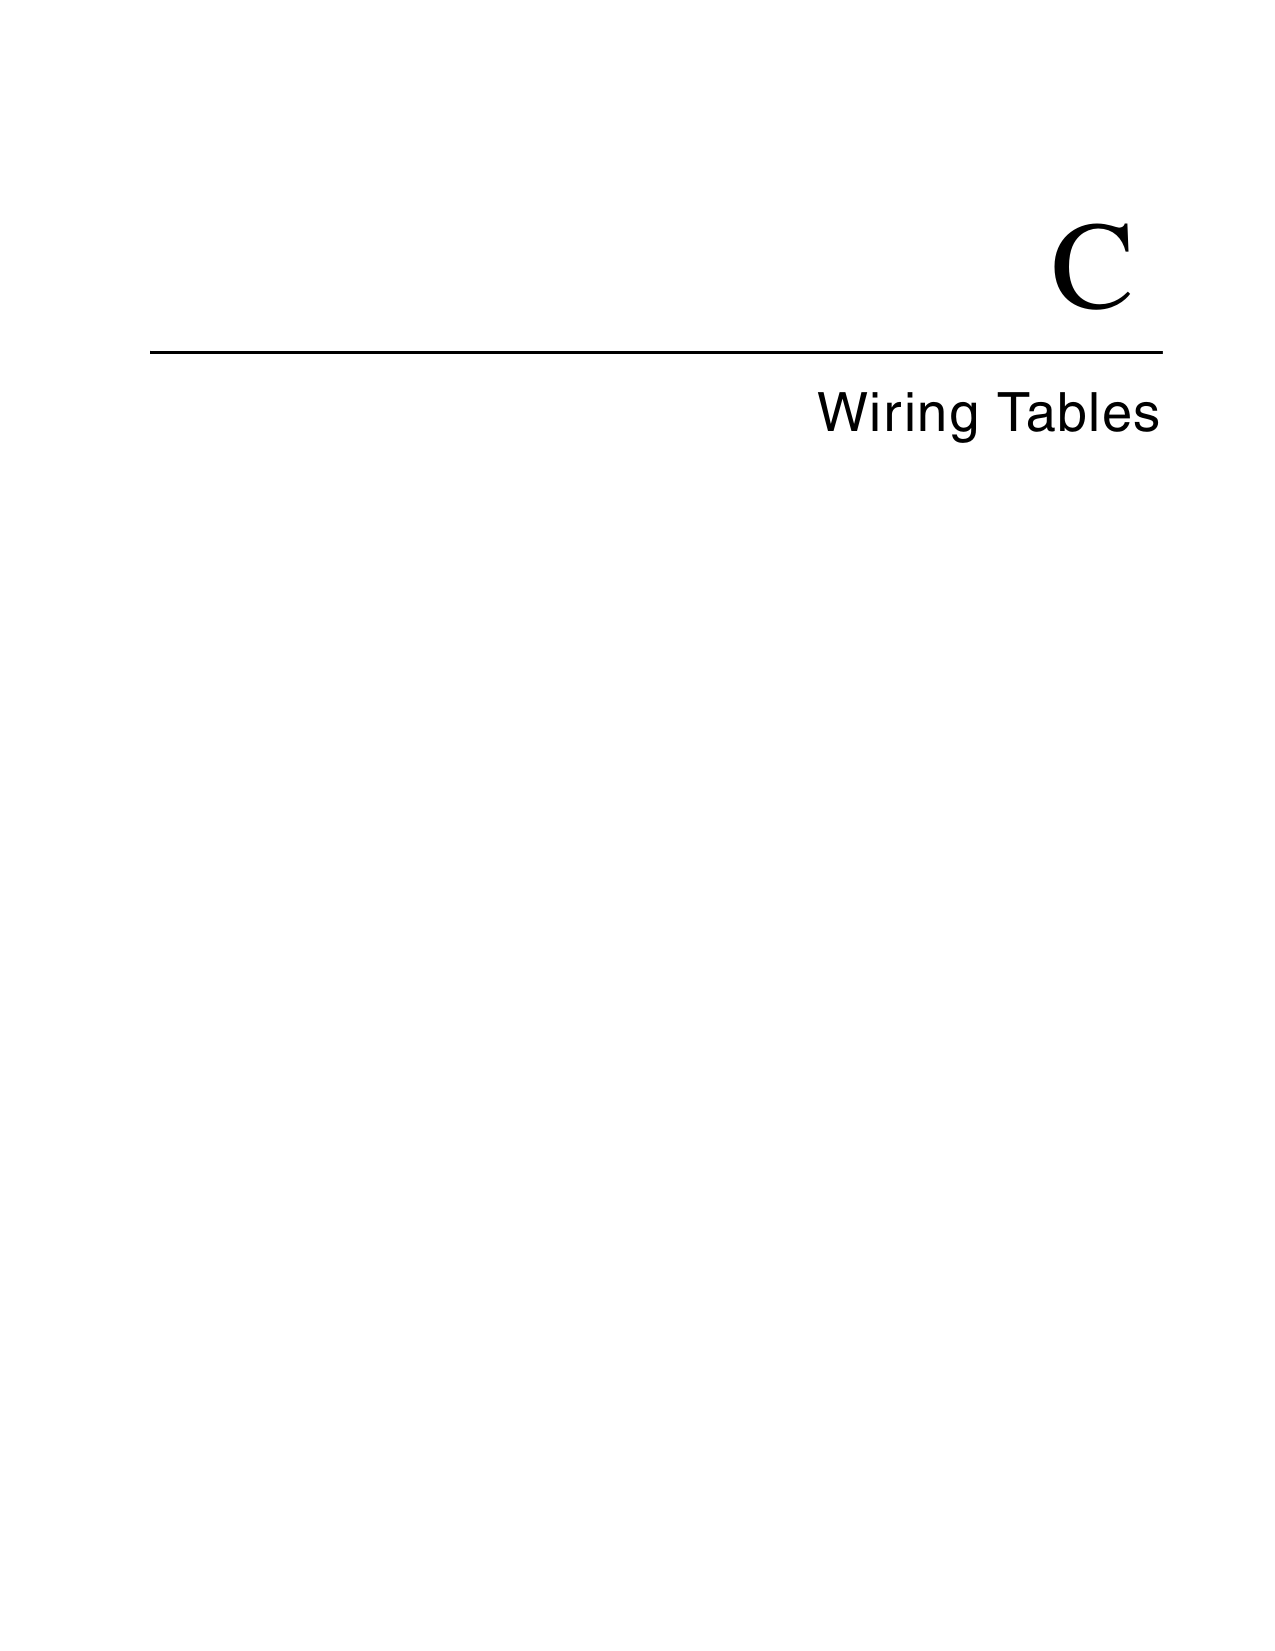 CWiring Tables